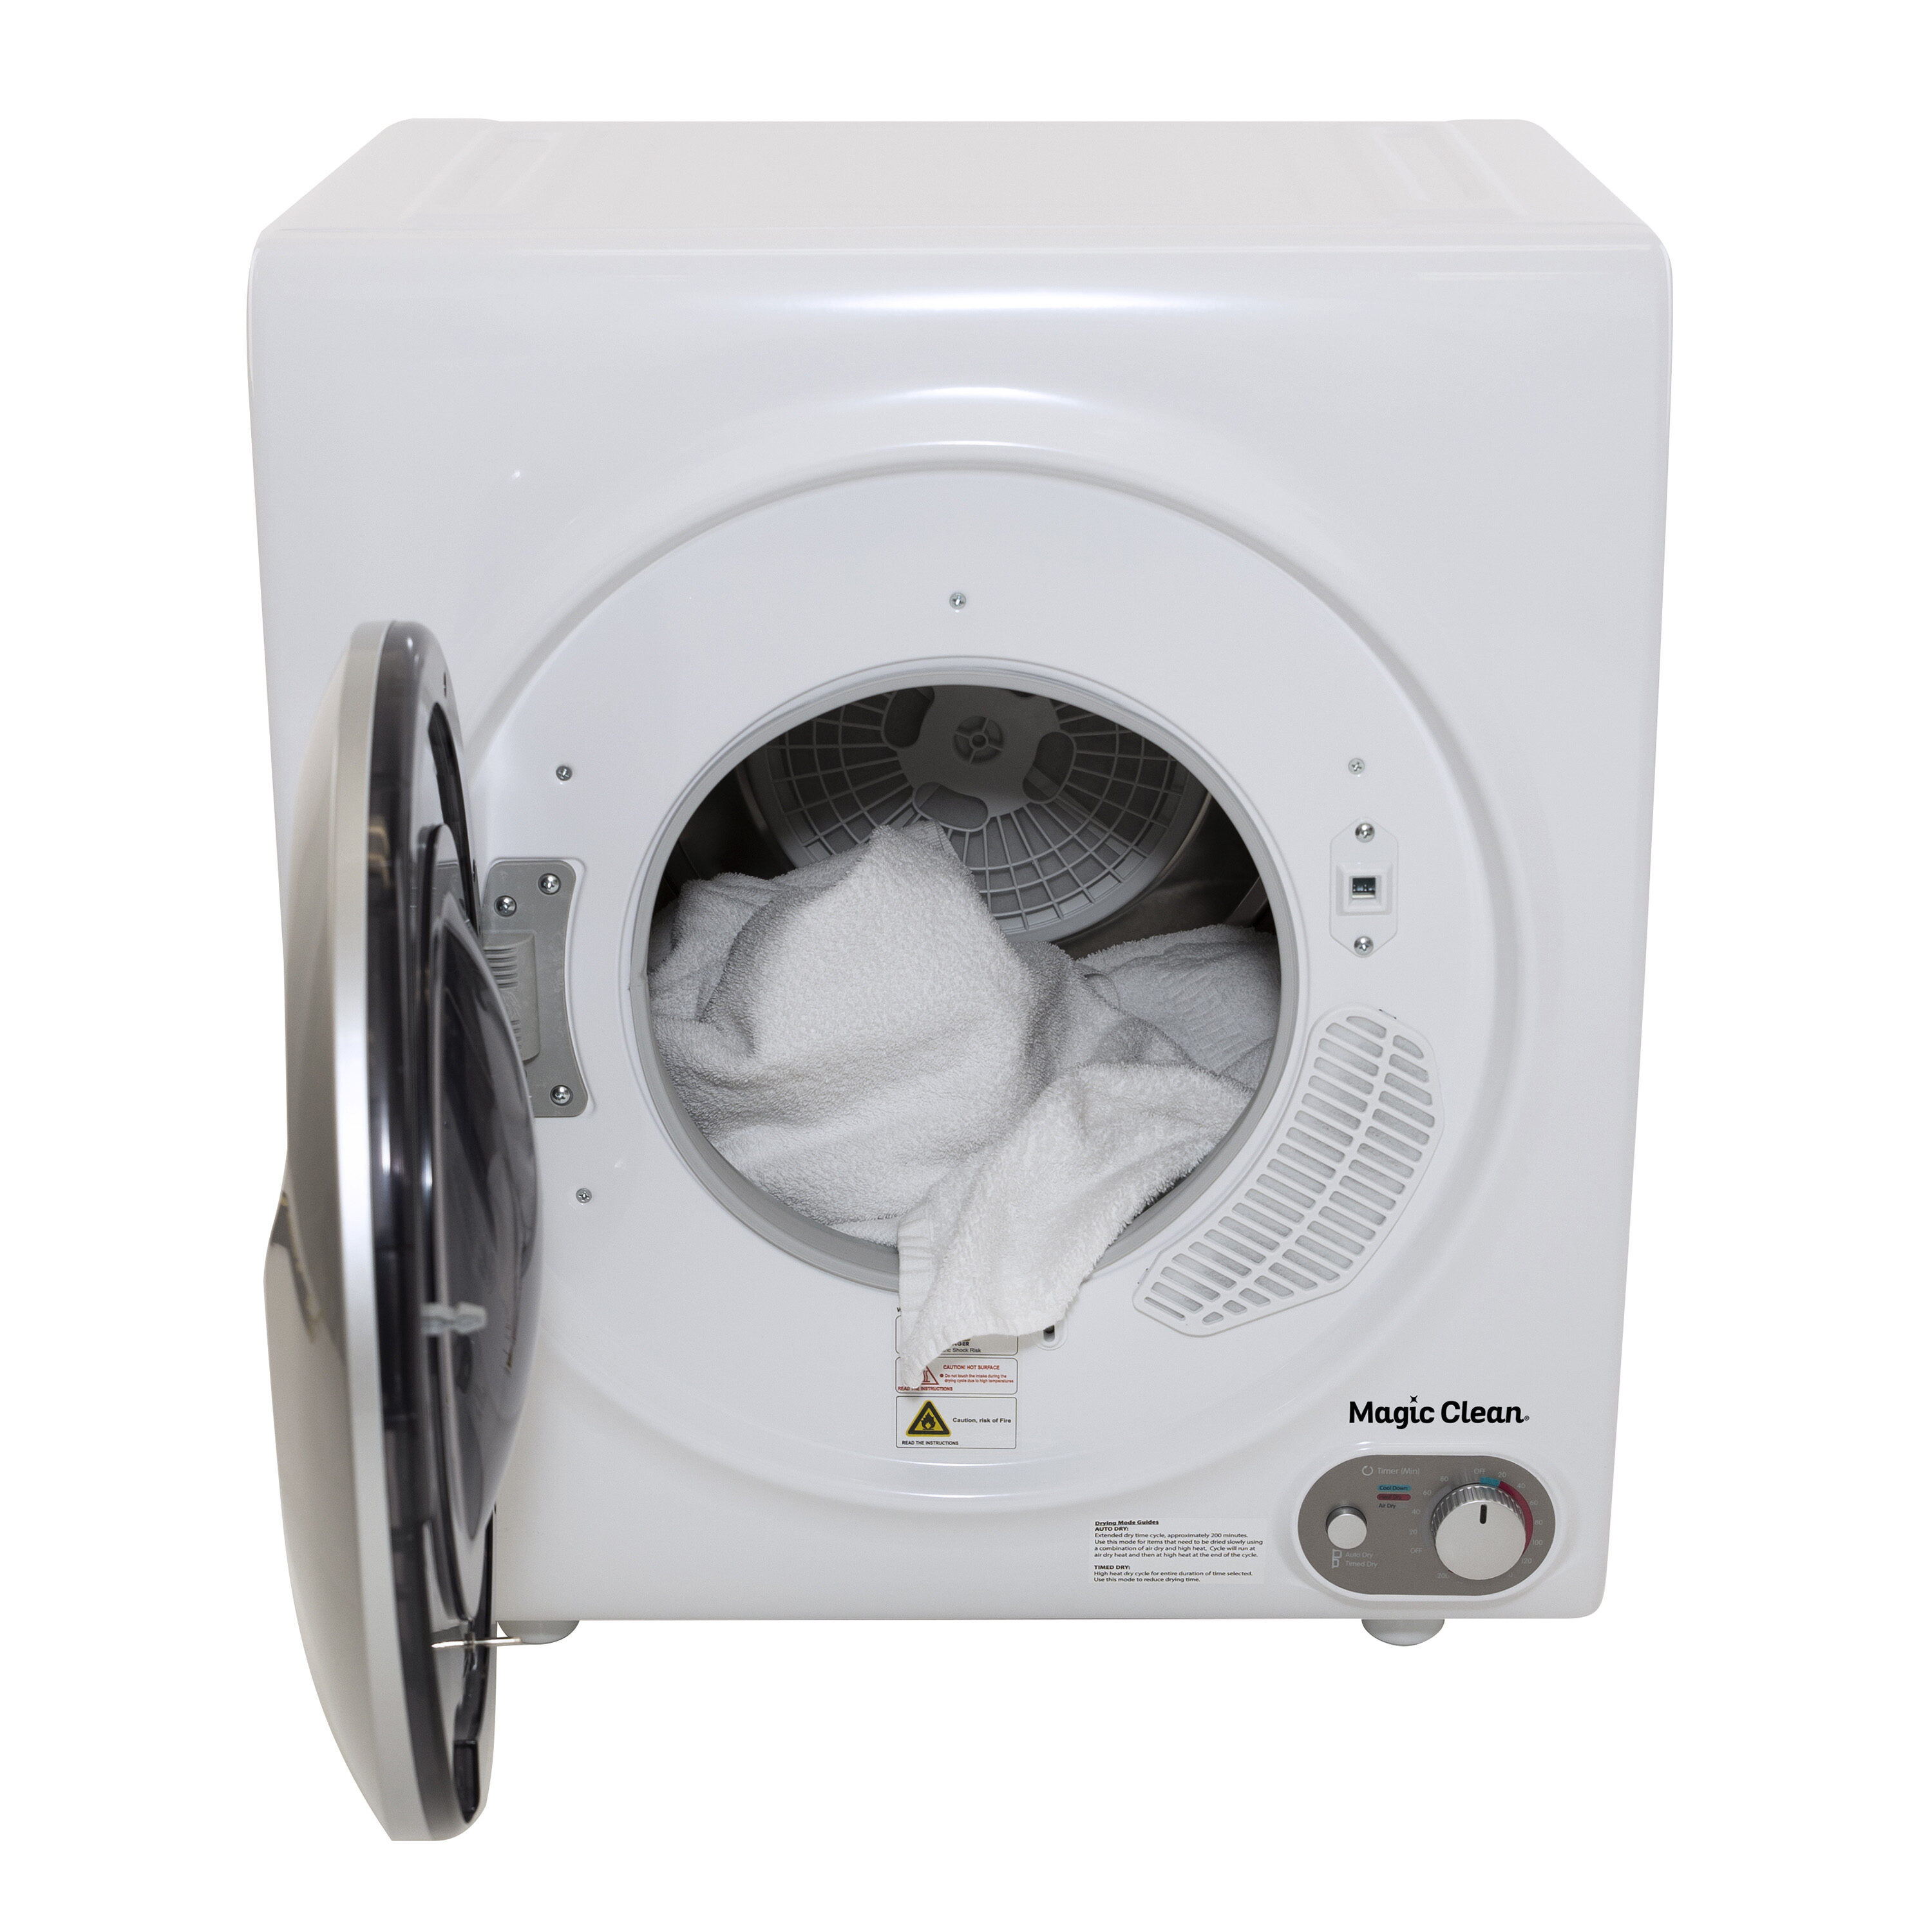 XtremepowerUS 1 Cubic Feet cu. ft. Portable Dryer in White